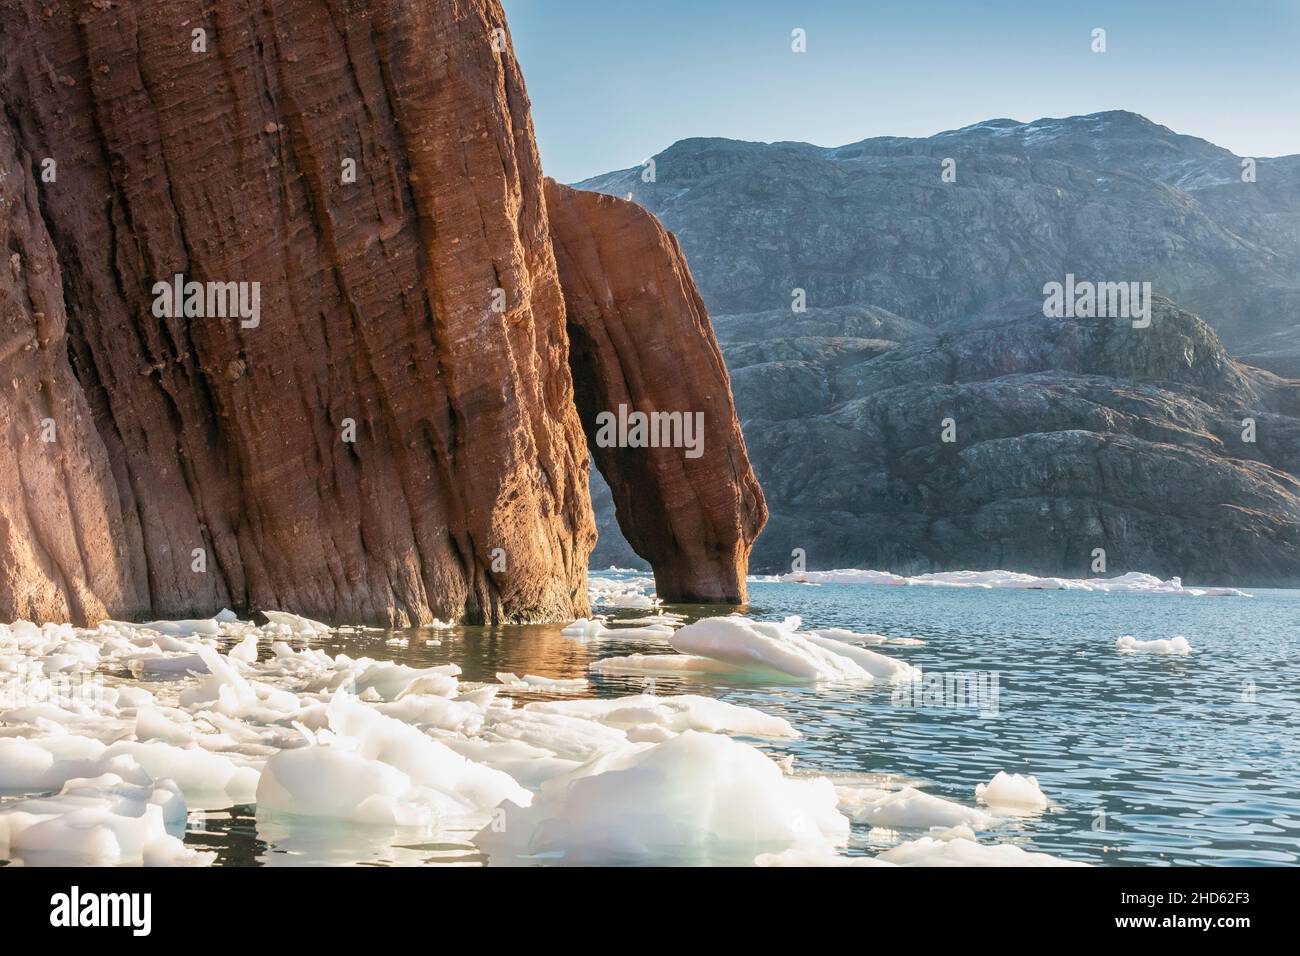 Sandstone arch with ice floes, Rode O with Milne Land in BG, Rodefjord, Scoresby Sund, Greenland Stock Photo